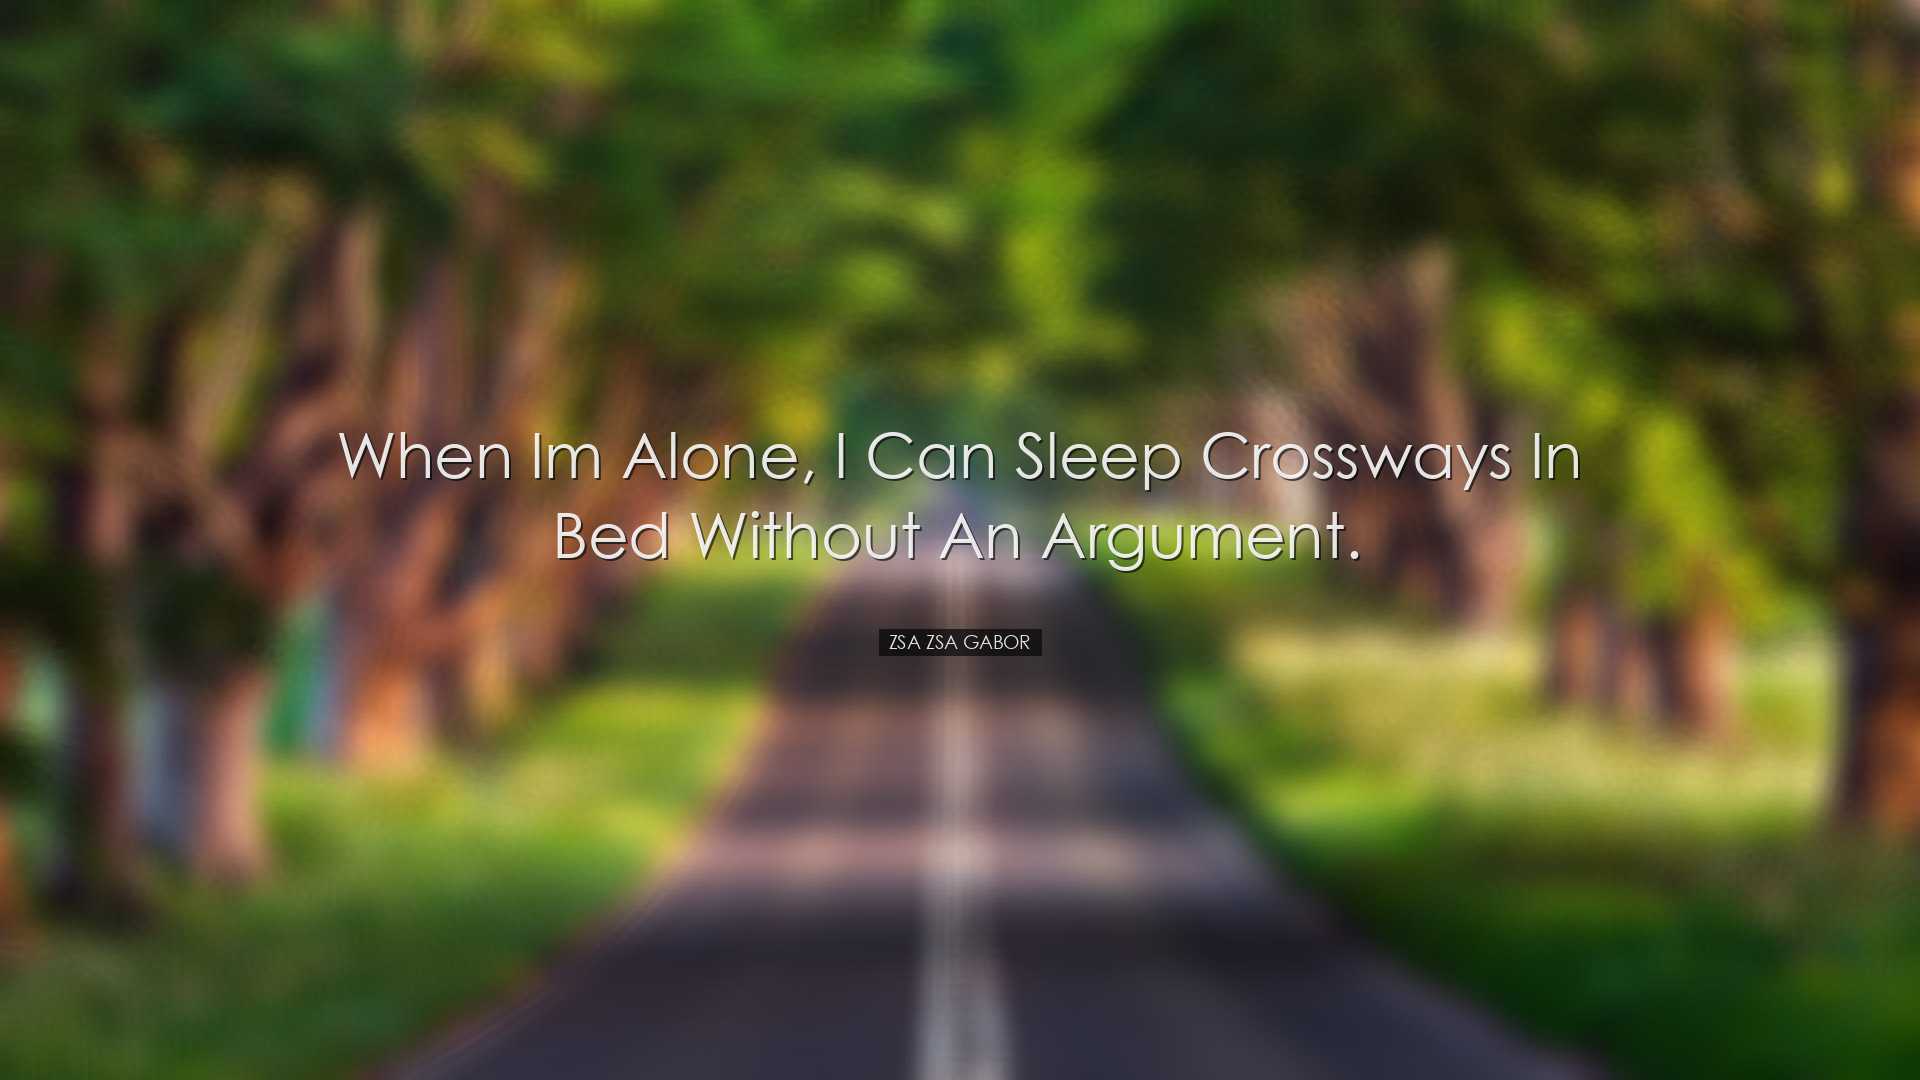 When Im alone, I can sleep crossways in bed without an argument. -